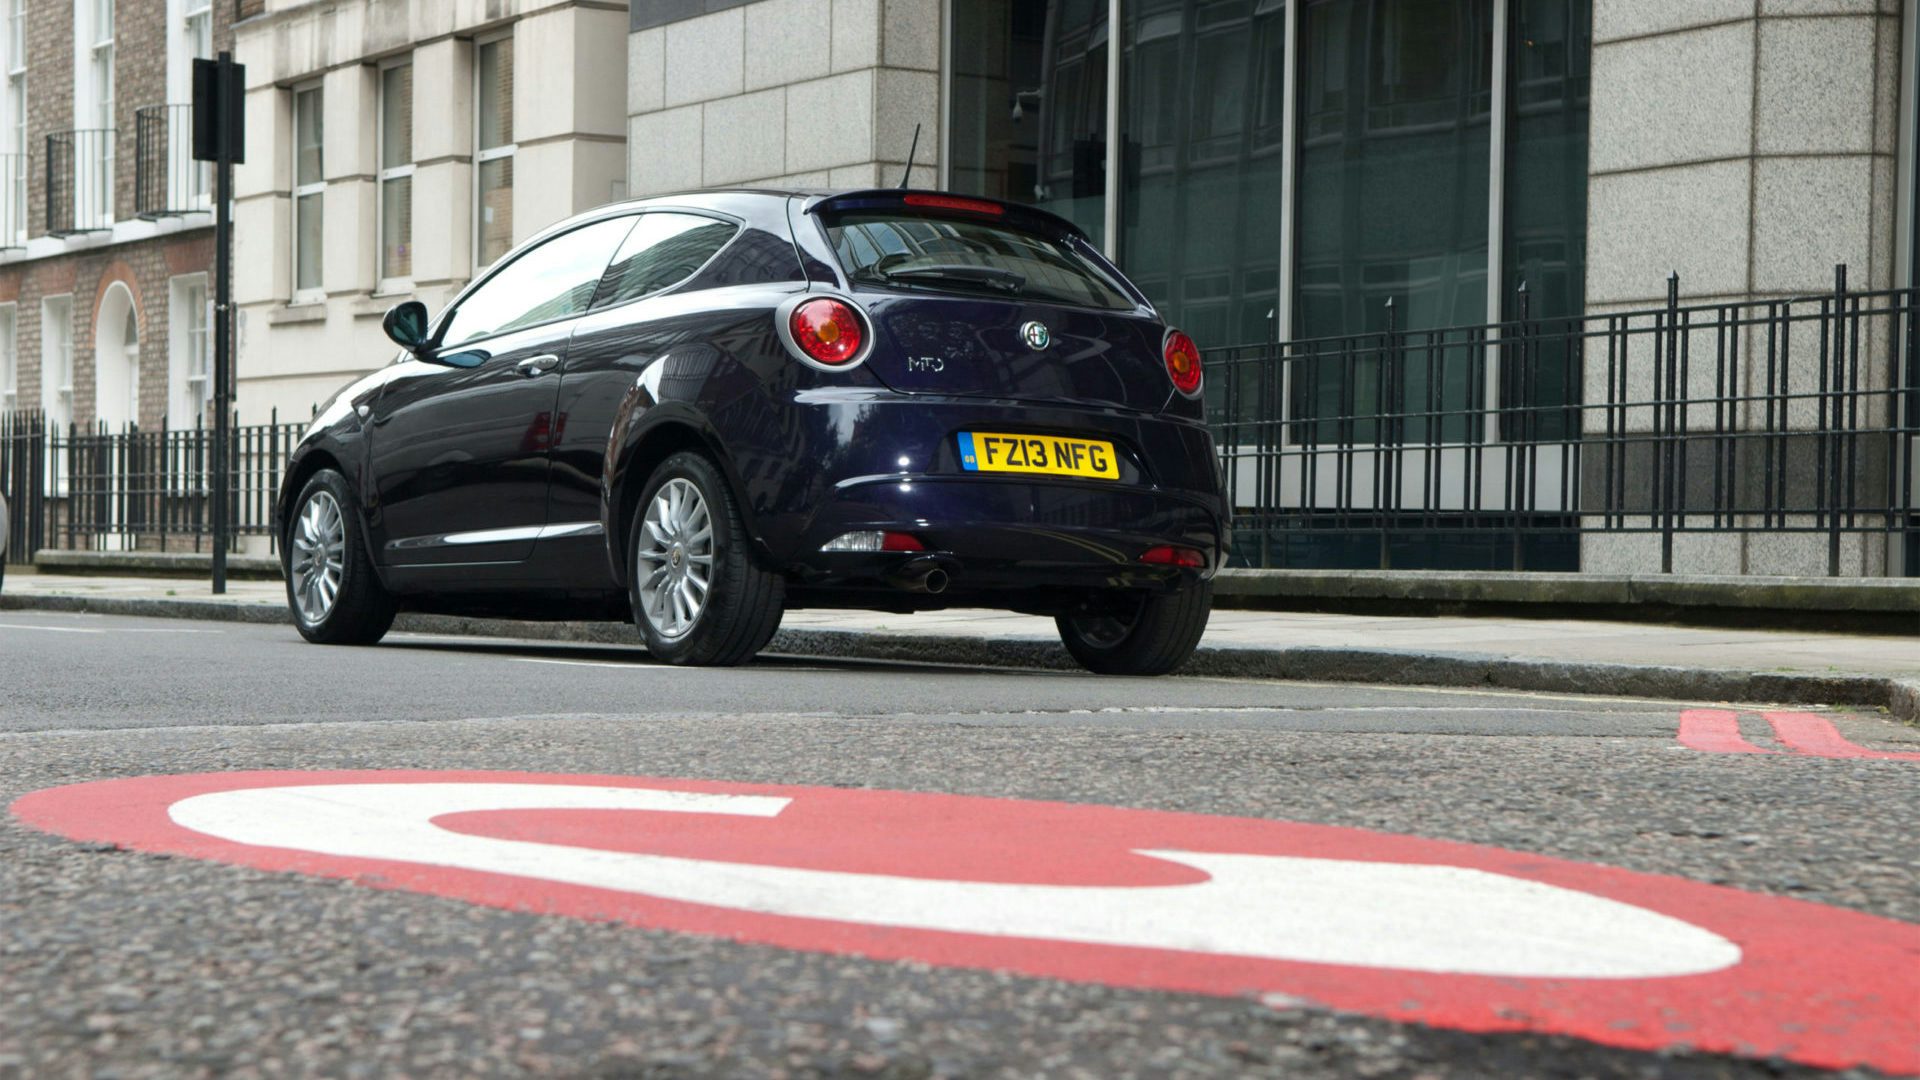 Do electric cars pay the Congestion Charge? carwow